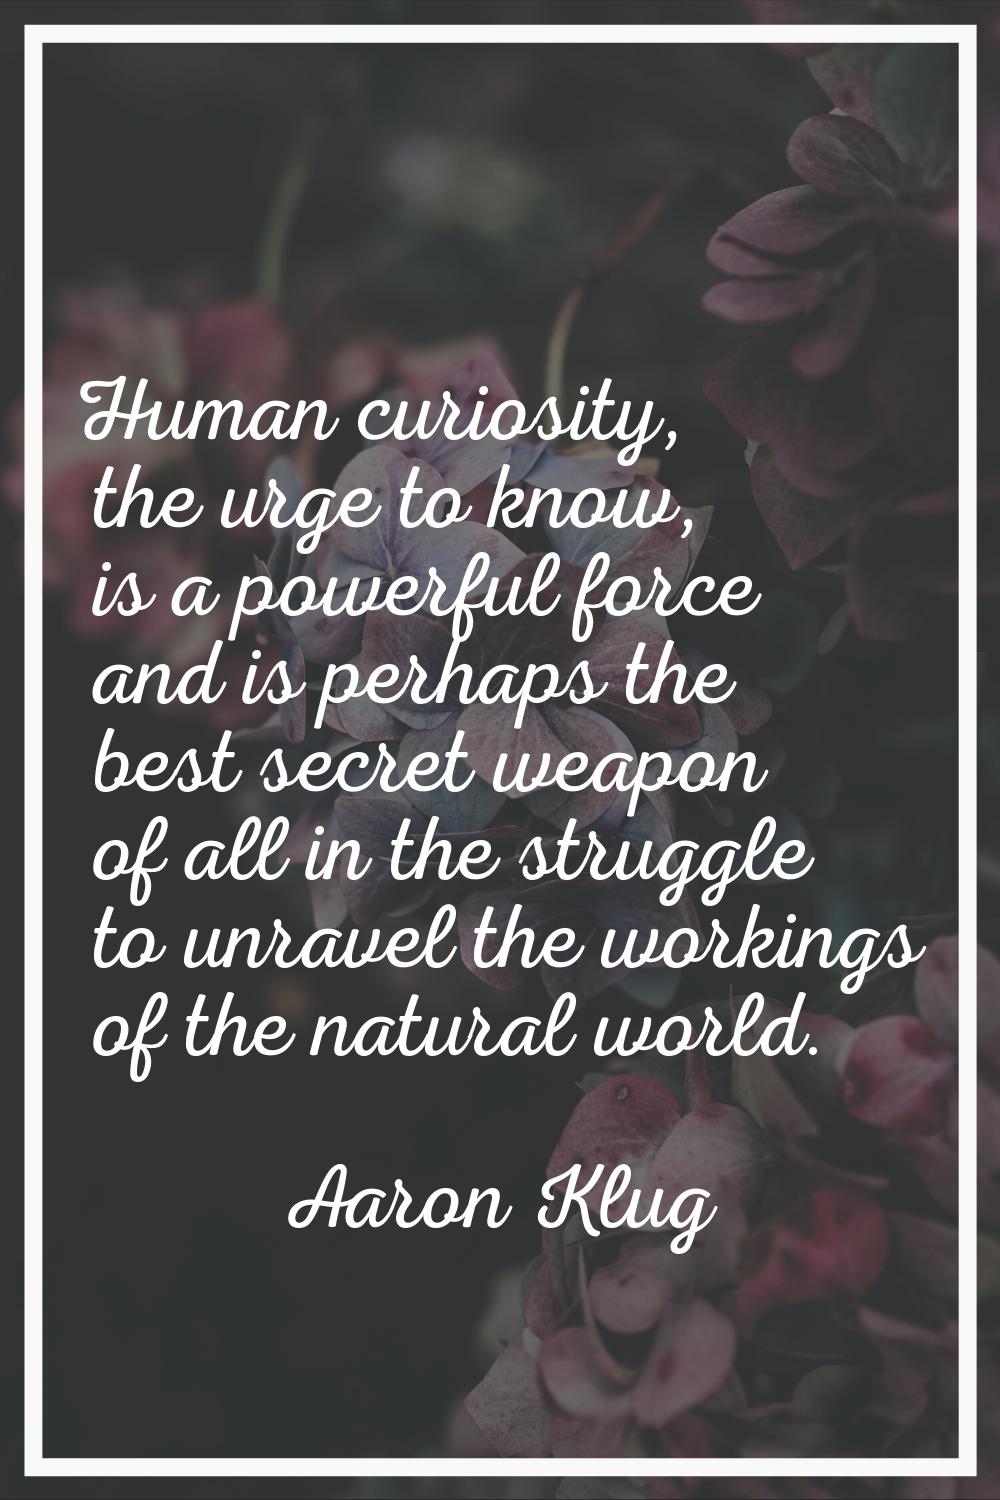 Human curiosity, the urge to know, is a powerful force and is perhaps the best secret weapon of all